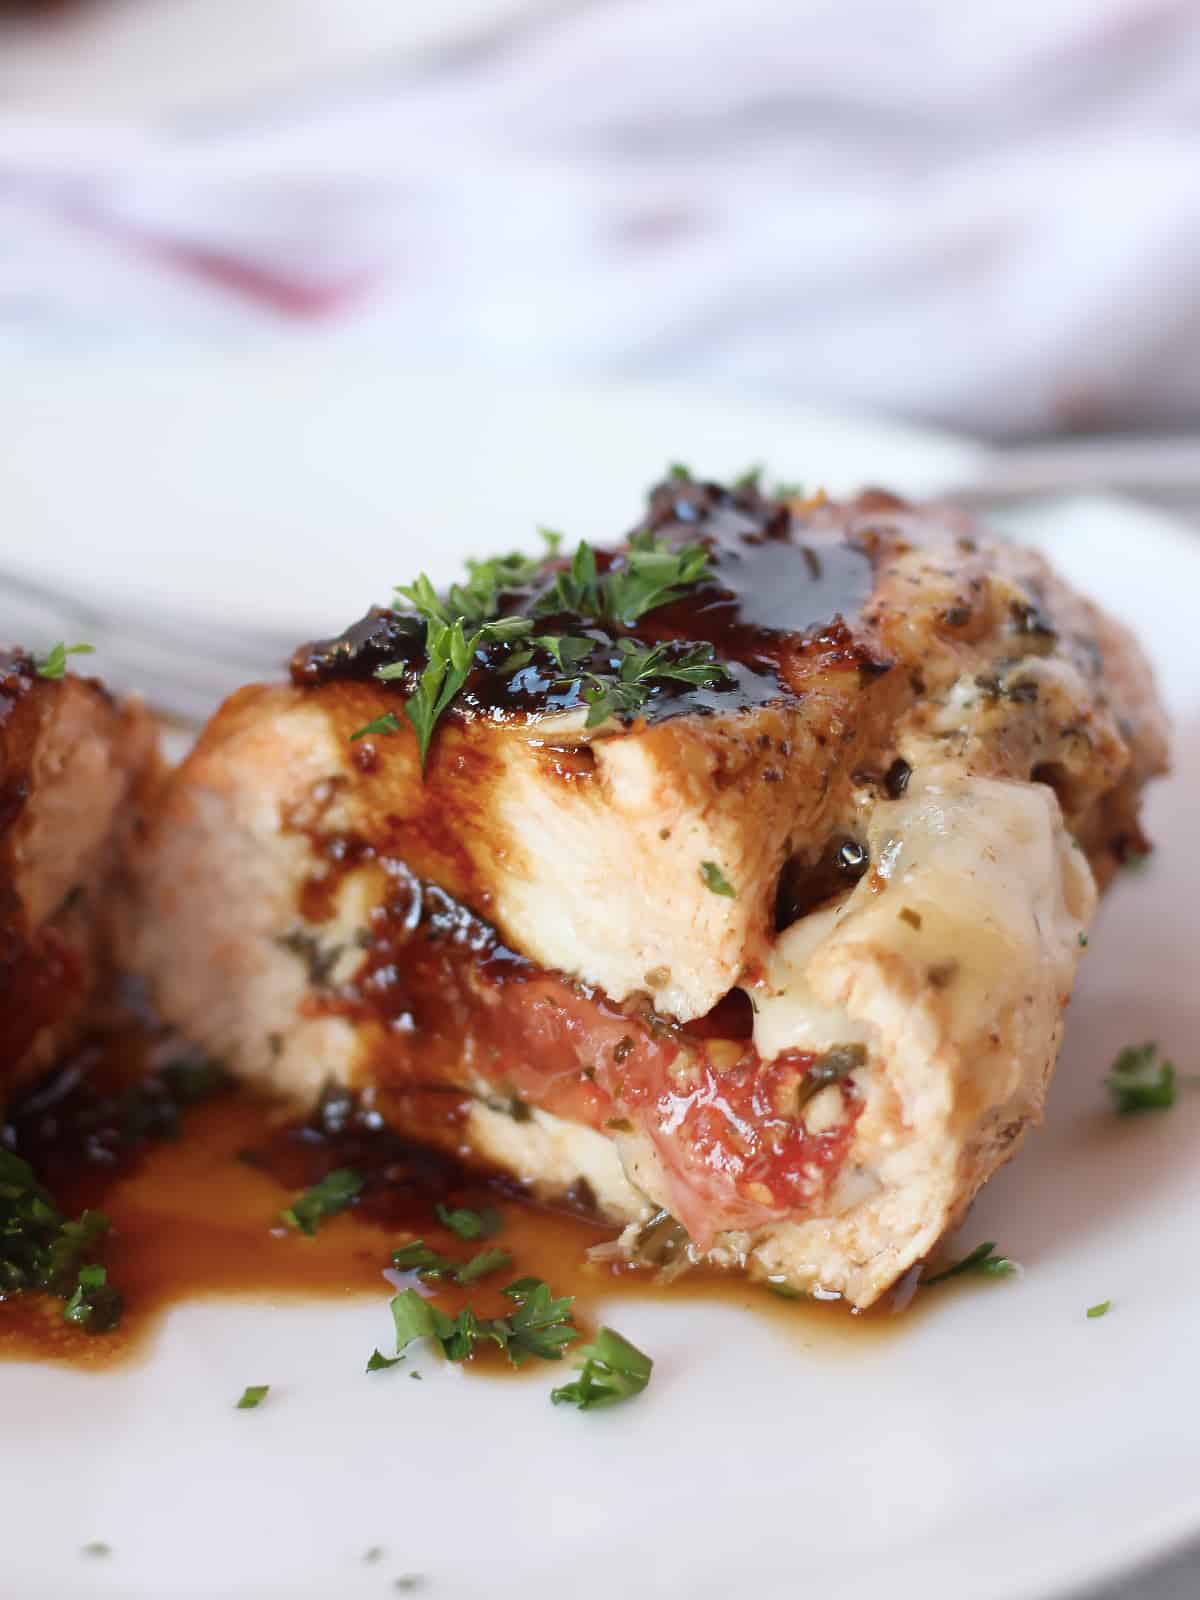 Balsamic reduction spooned over caprese stuffed chicken breasts.